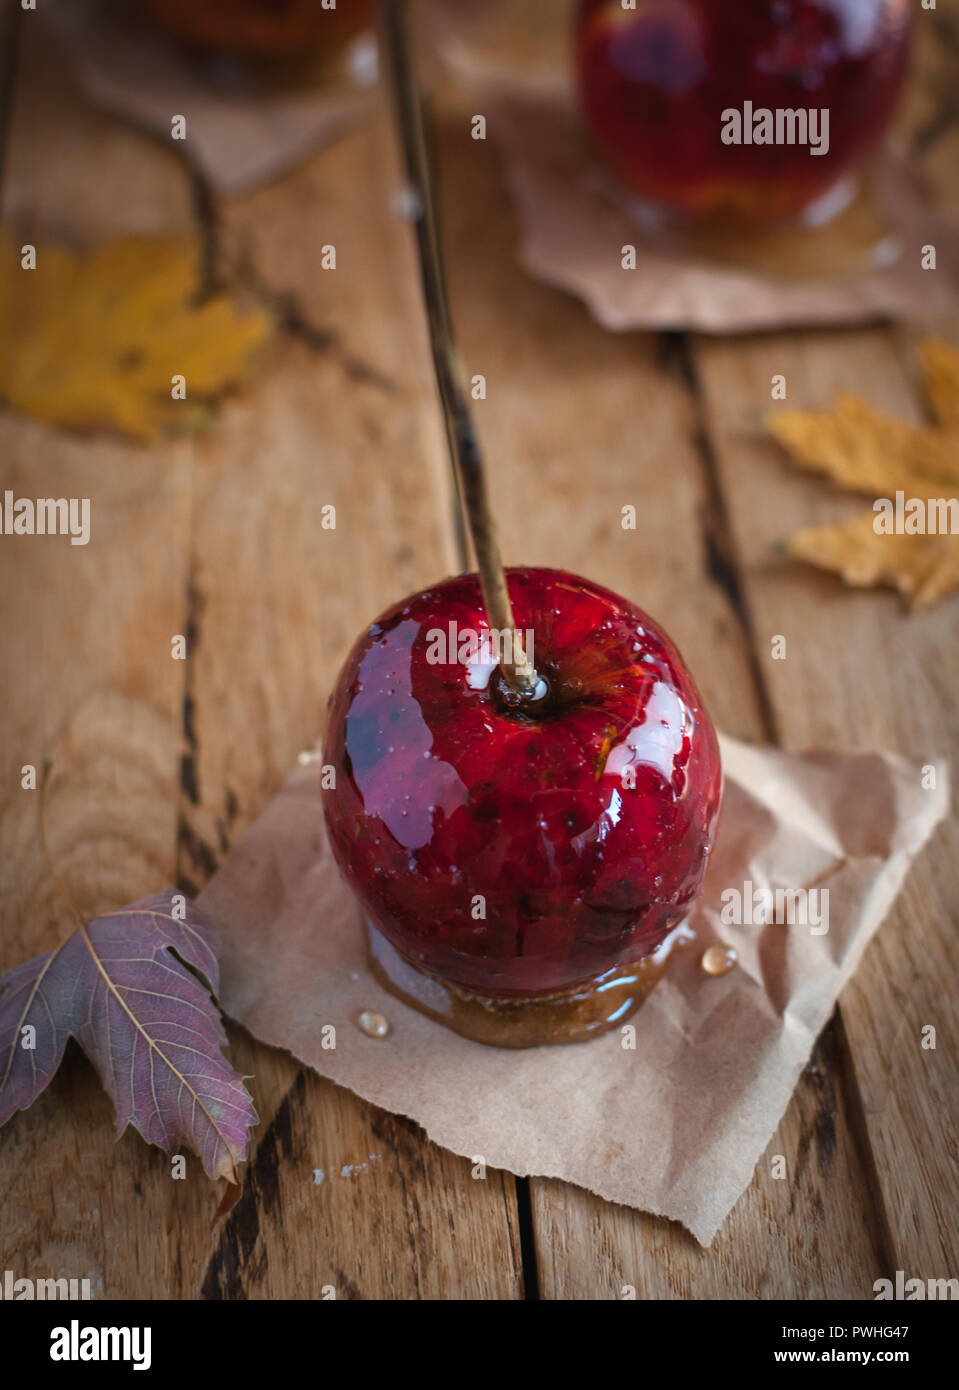 Close-up of candy apple on wooden background Stock Photo